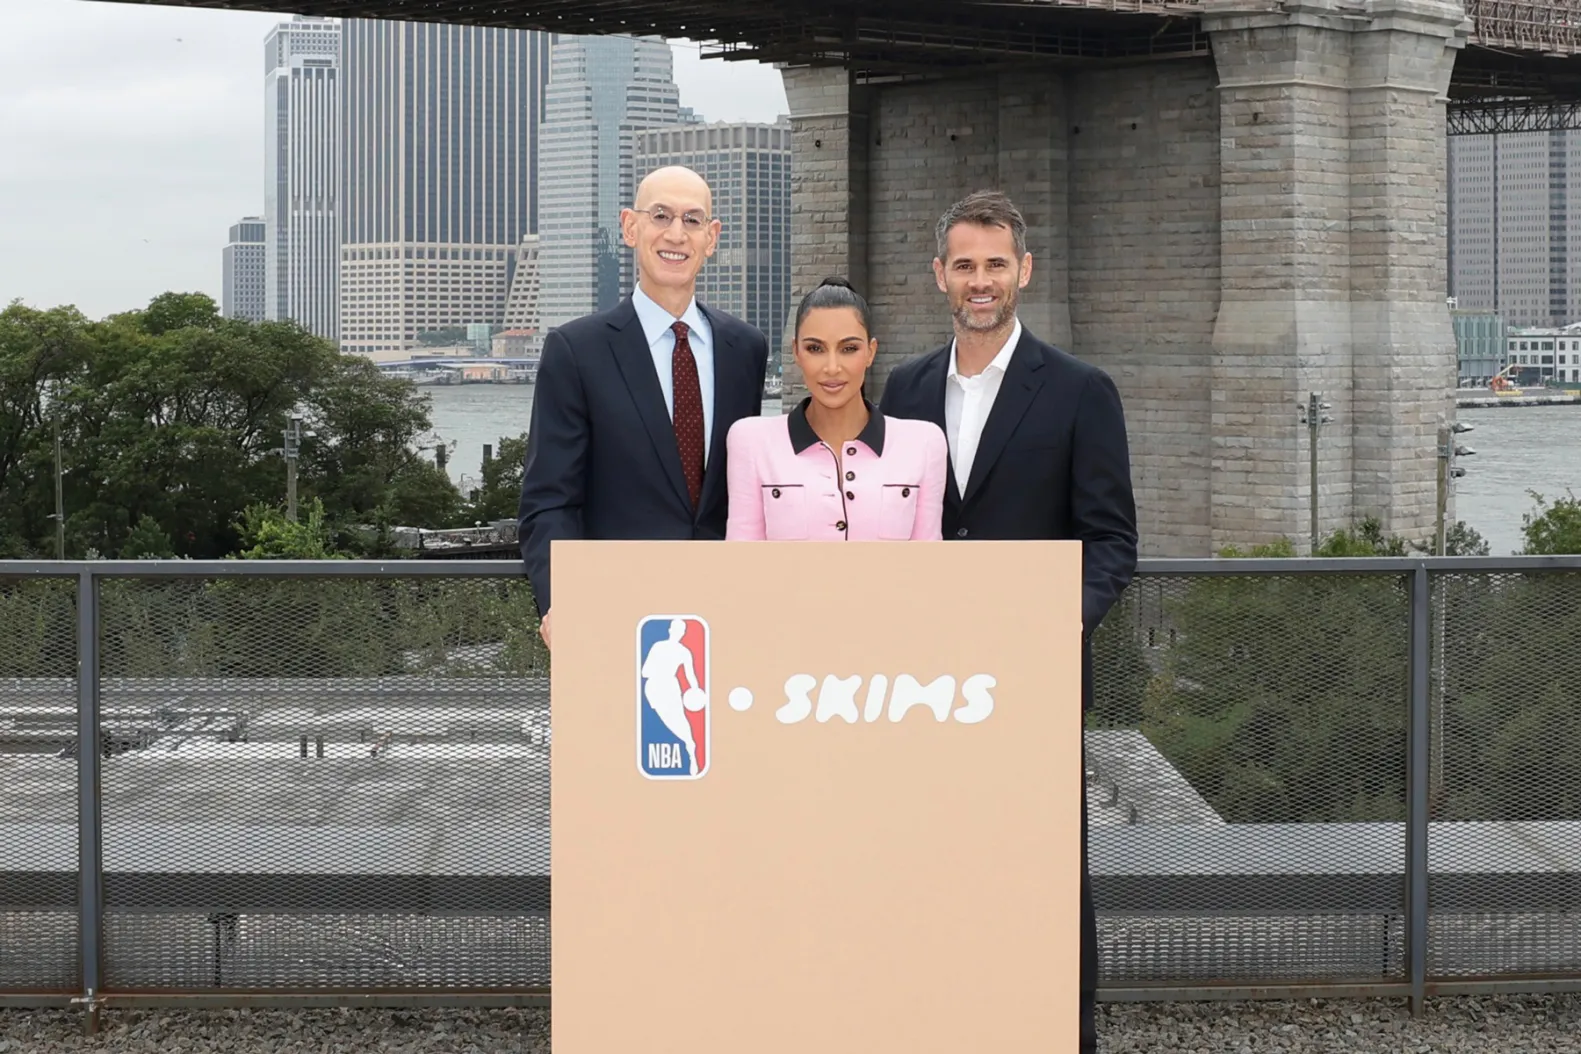 Introducing the SKIMS and NBA partnership. @SKIMS is now the Official  Underwear Partner of the @NBA, @WNBA and @Usabasketball